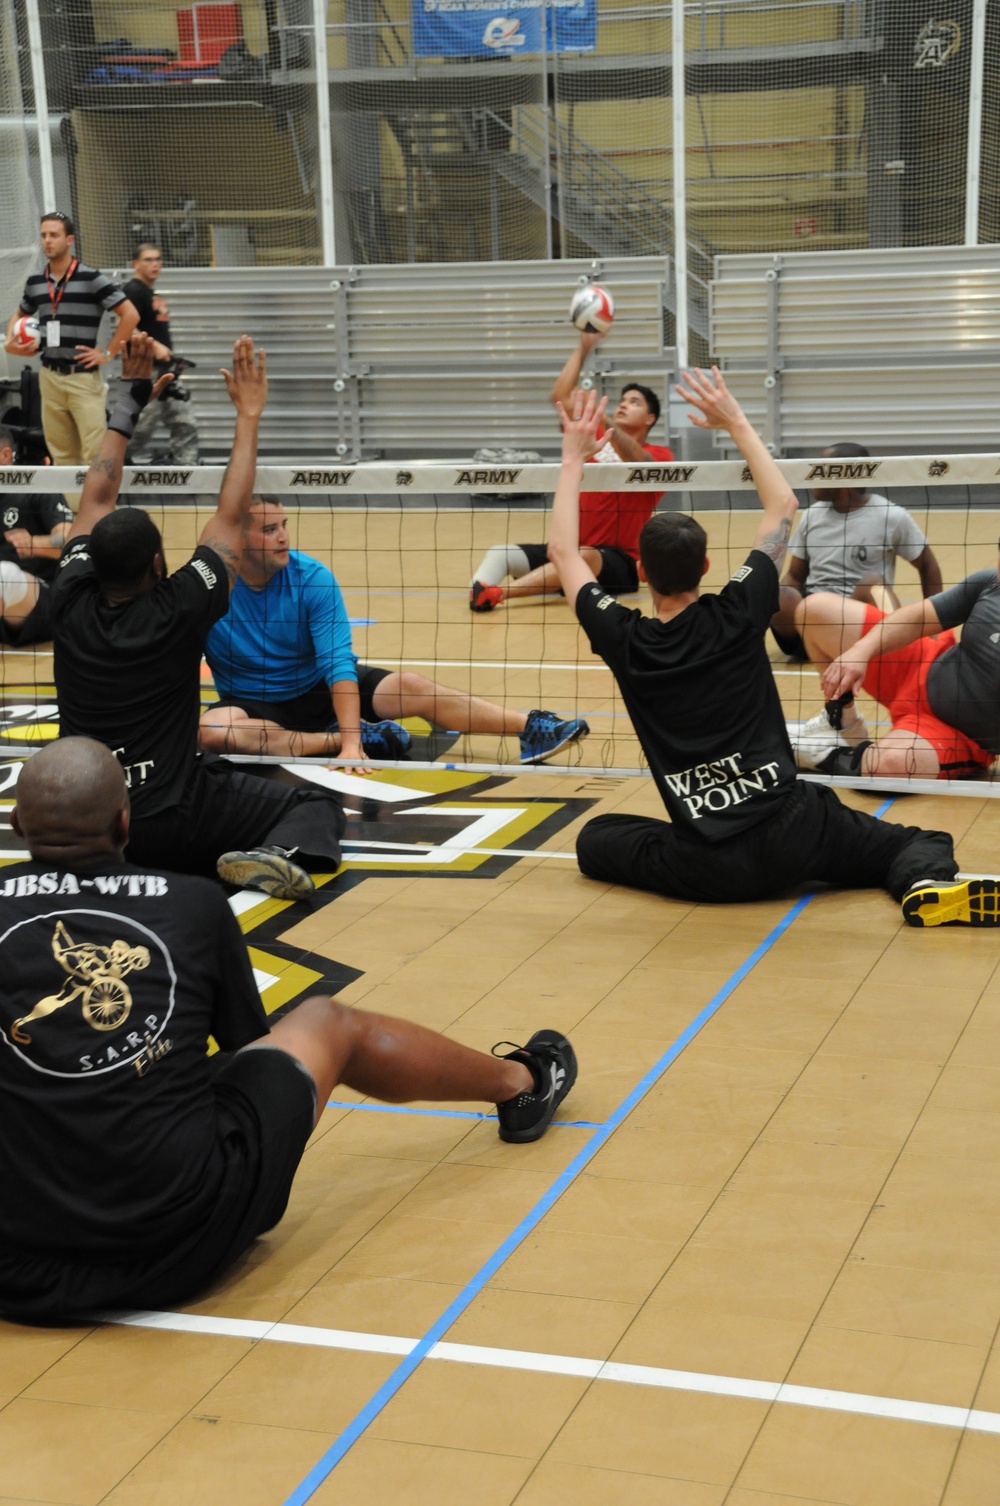 Marine Sgt. Alex Nguyen serves during sitting volleyball practice at the 2014 US Army Warrior Trials